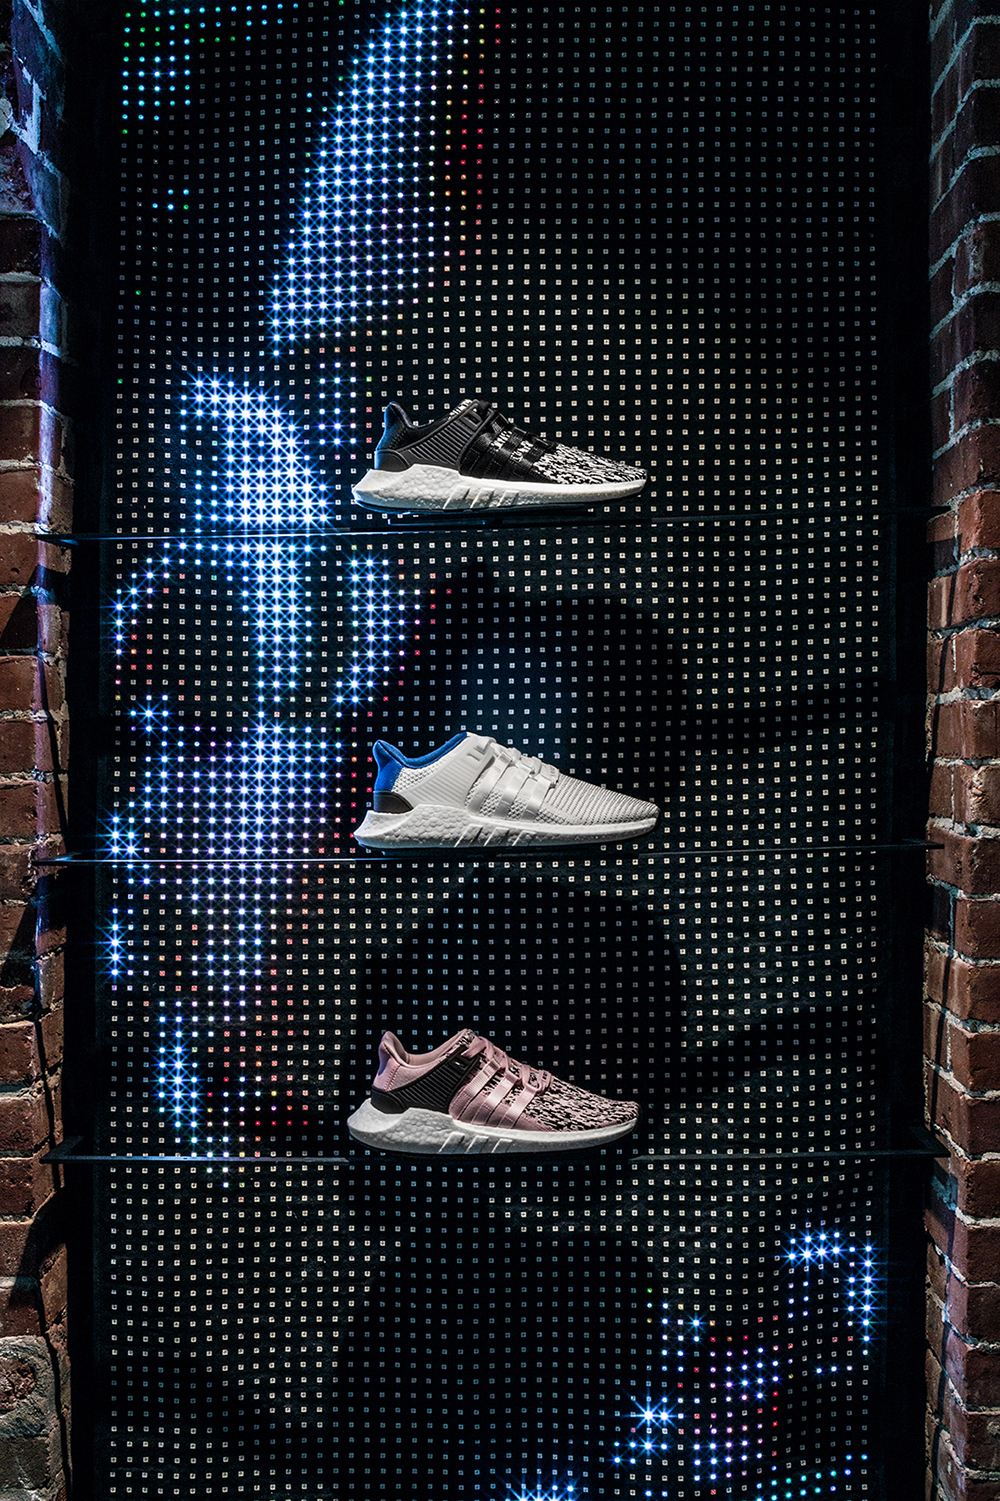 A closeup of three sneakers posted in front of a profile of a face shown on the LED curtain.